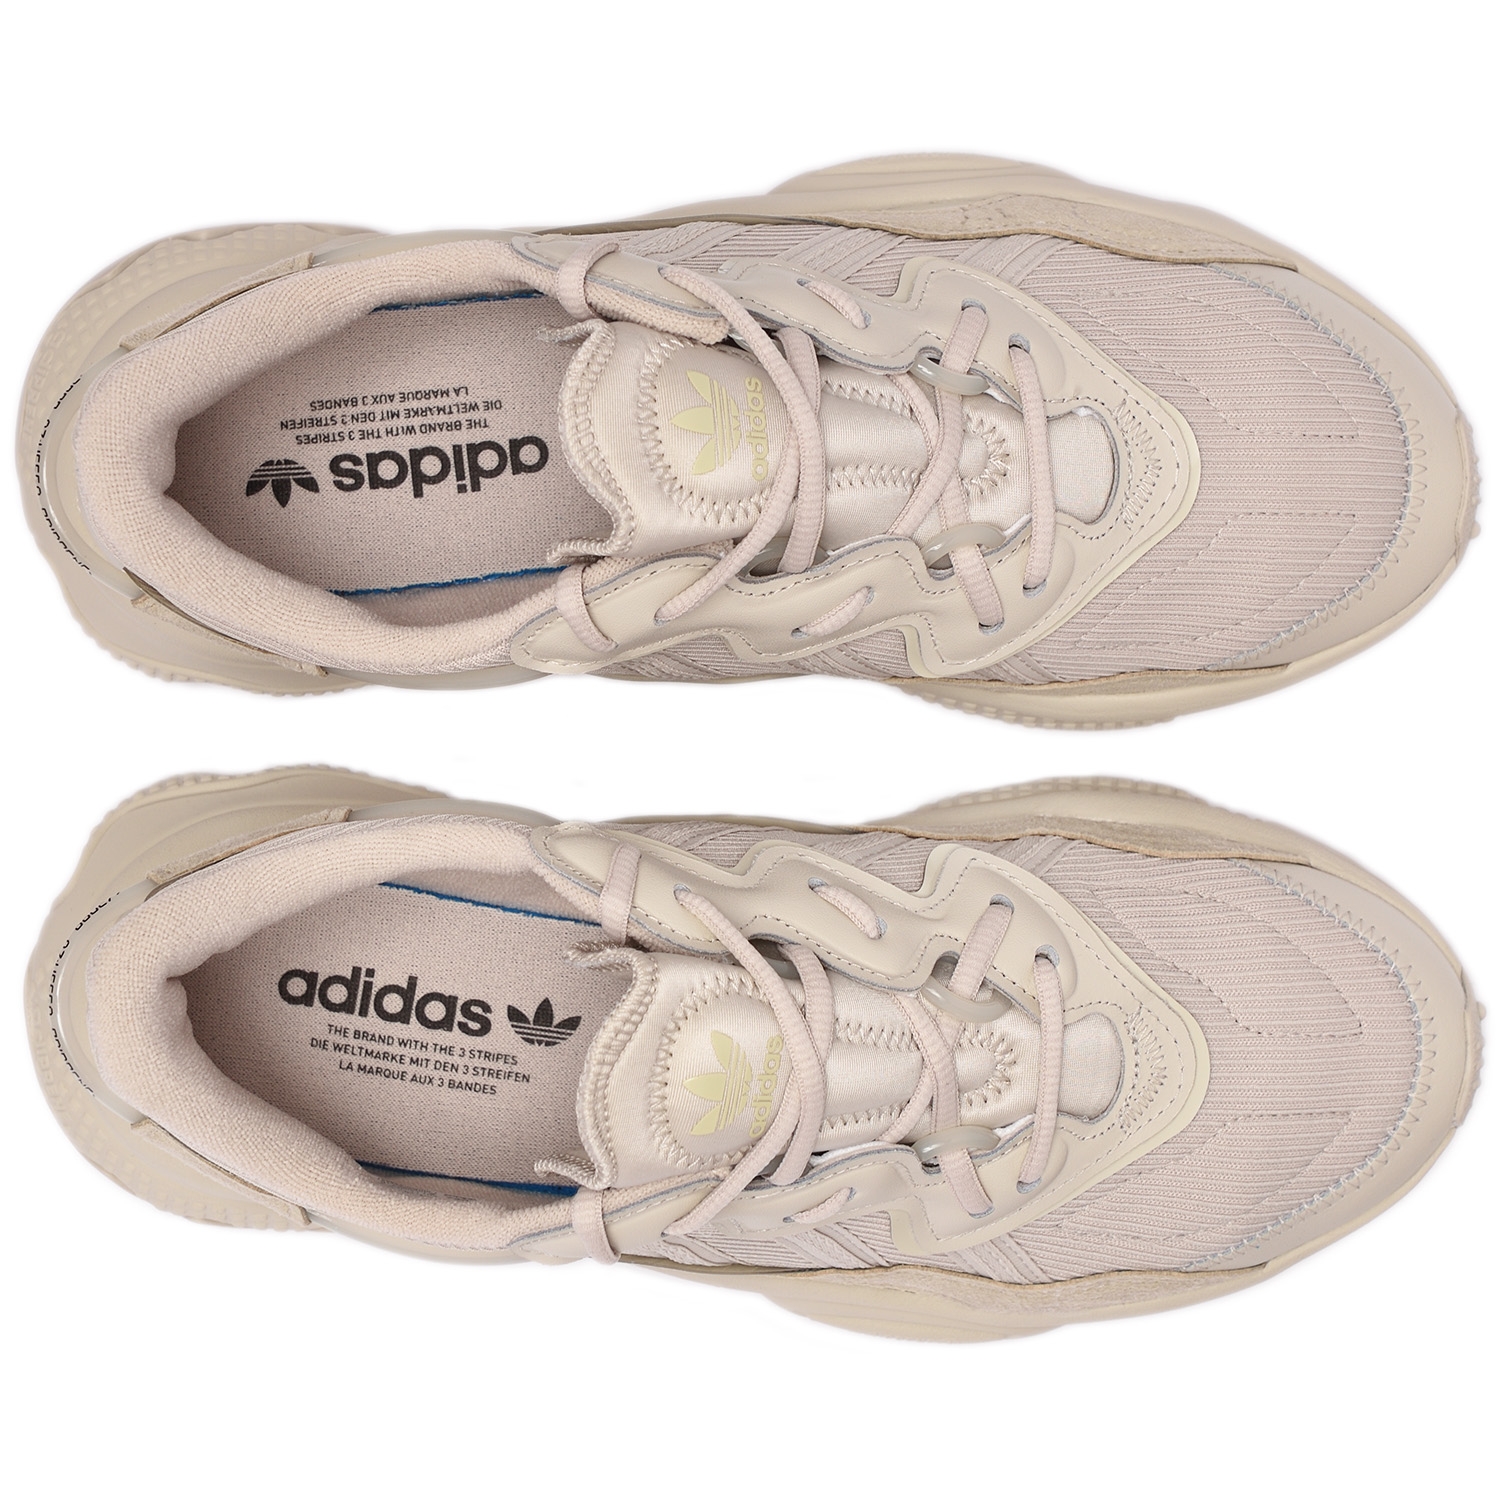 аdidas Originals OZWEEGO Bliss / Bliss / Bliss